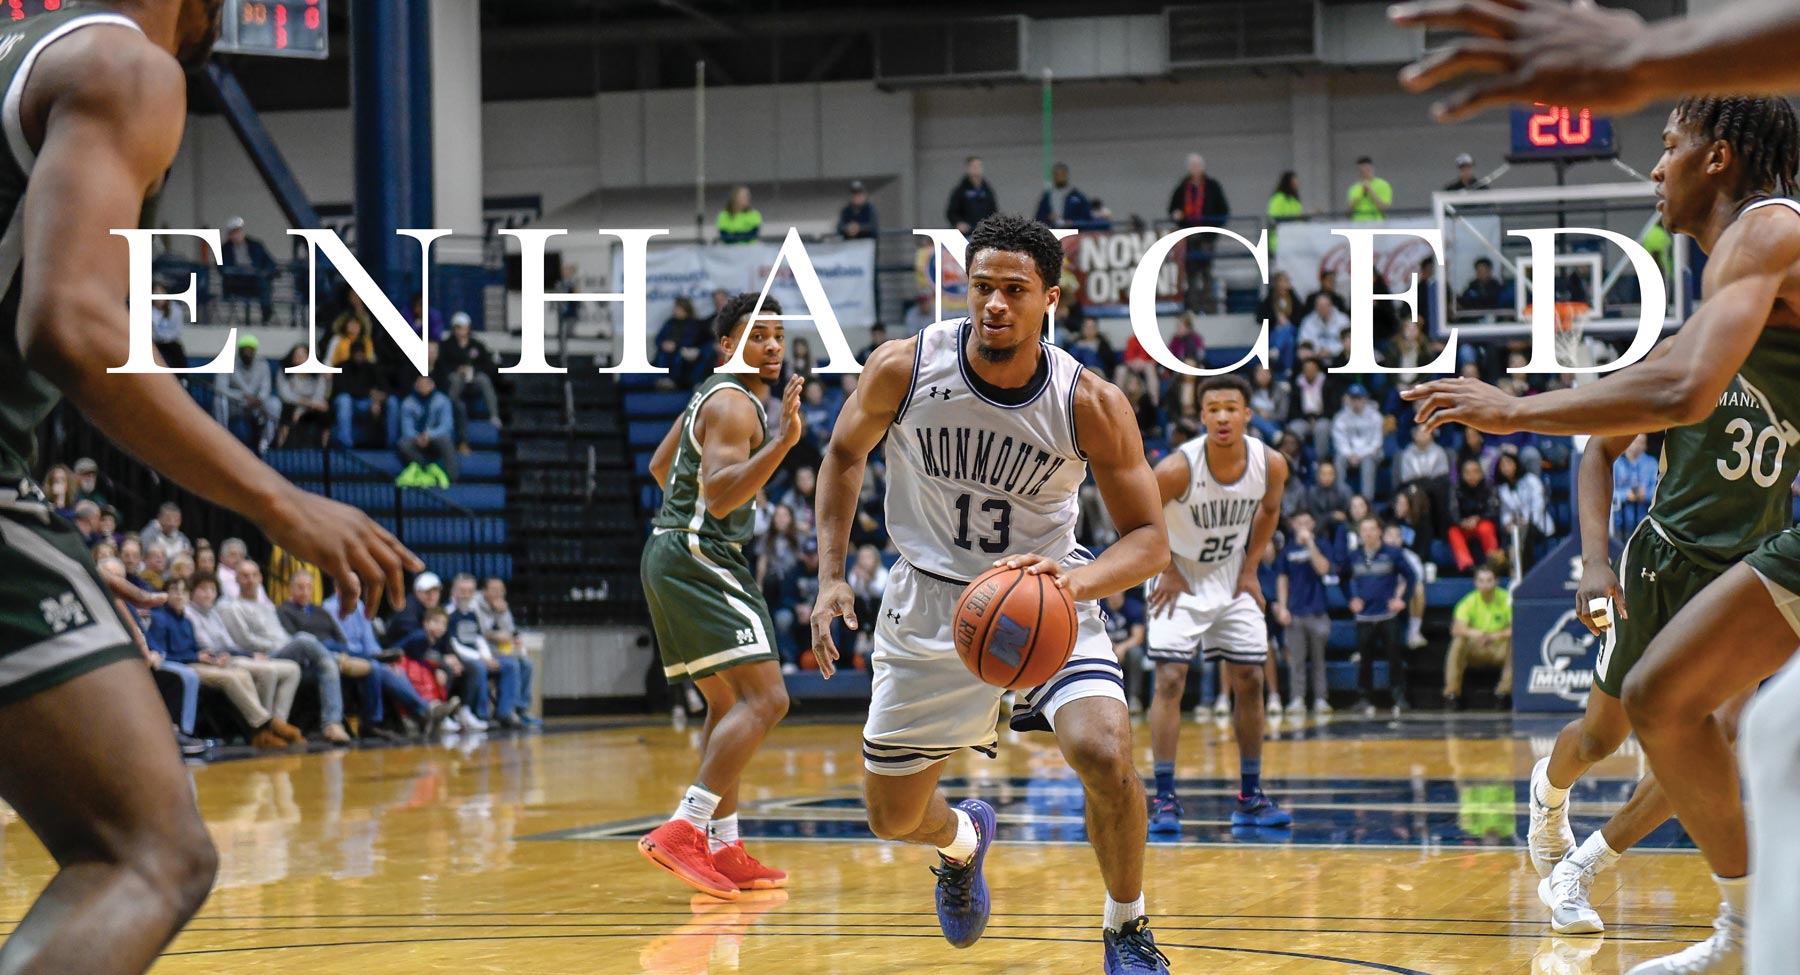 Monmouth basketball game with player dribbling ball and Enhanced title typography displayed